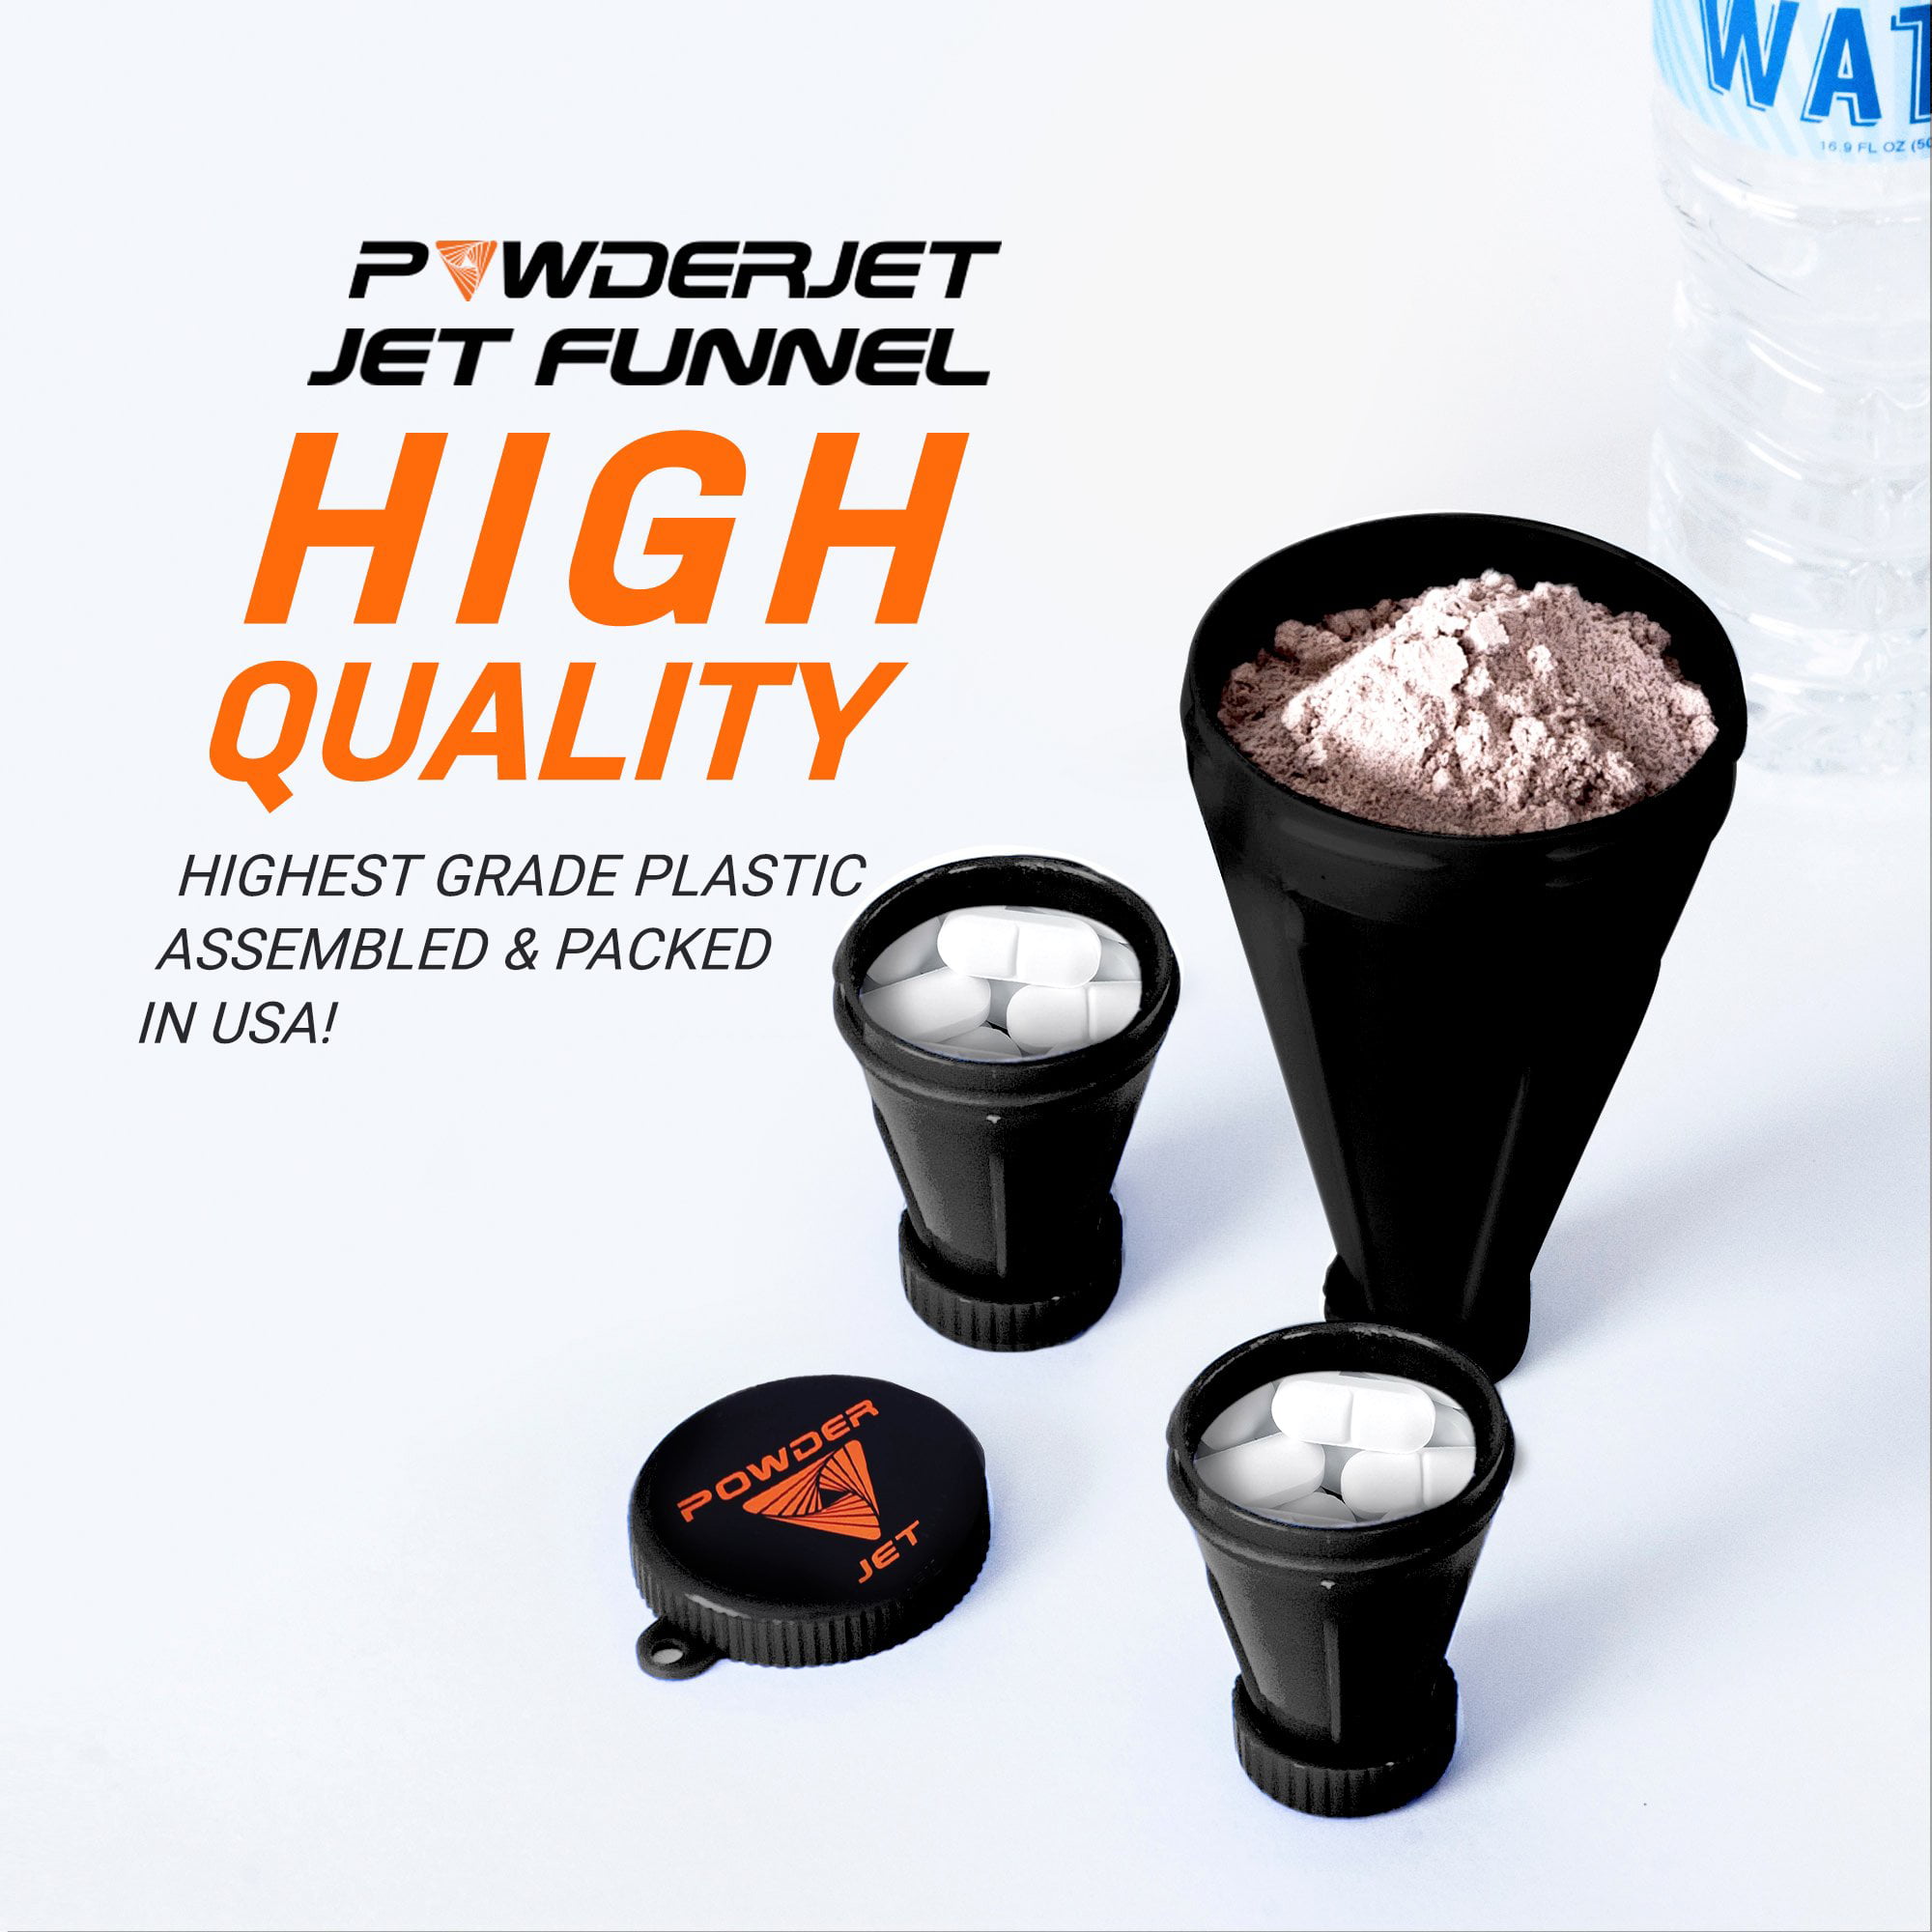 100ml Protein Powder Funnel - ACES1139 - IdeaStage Promotional